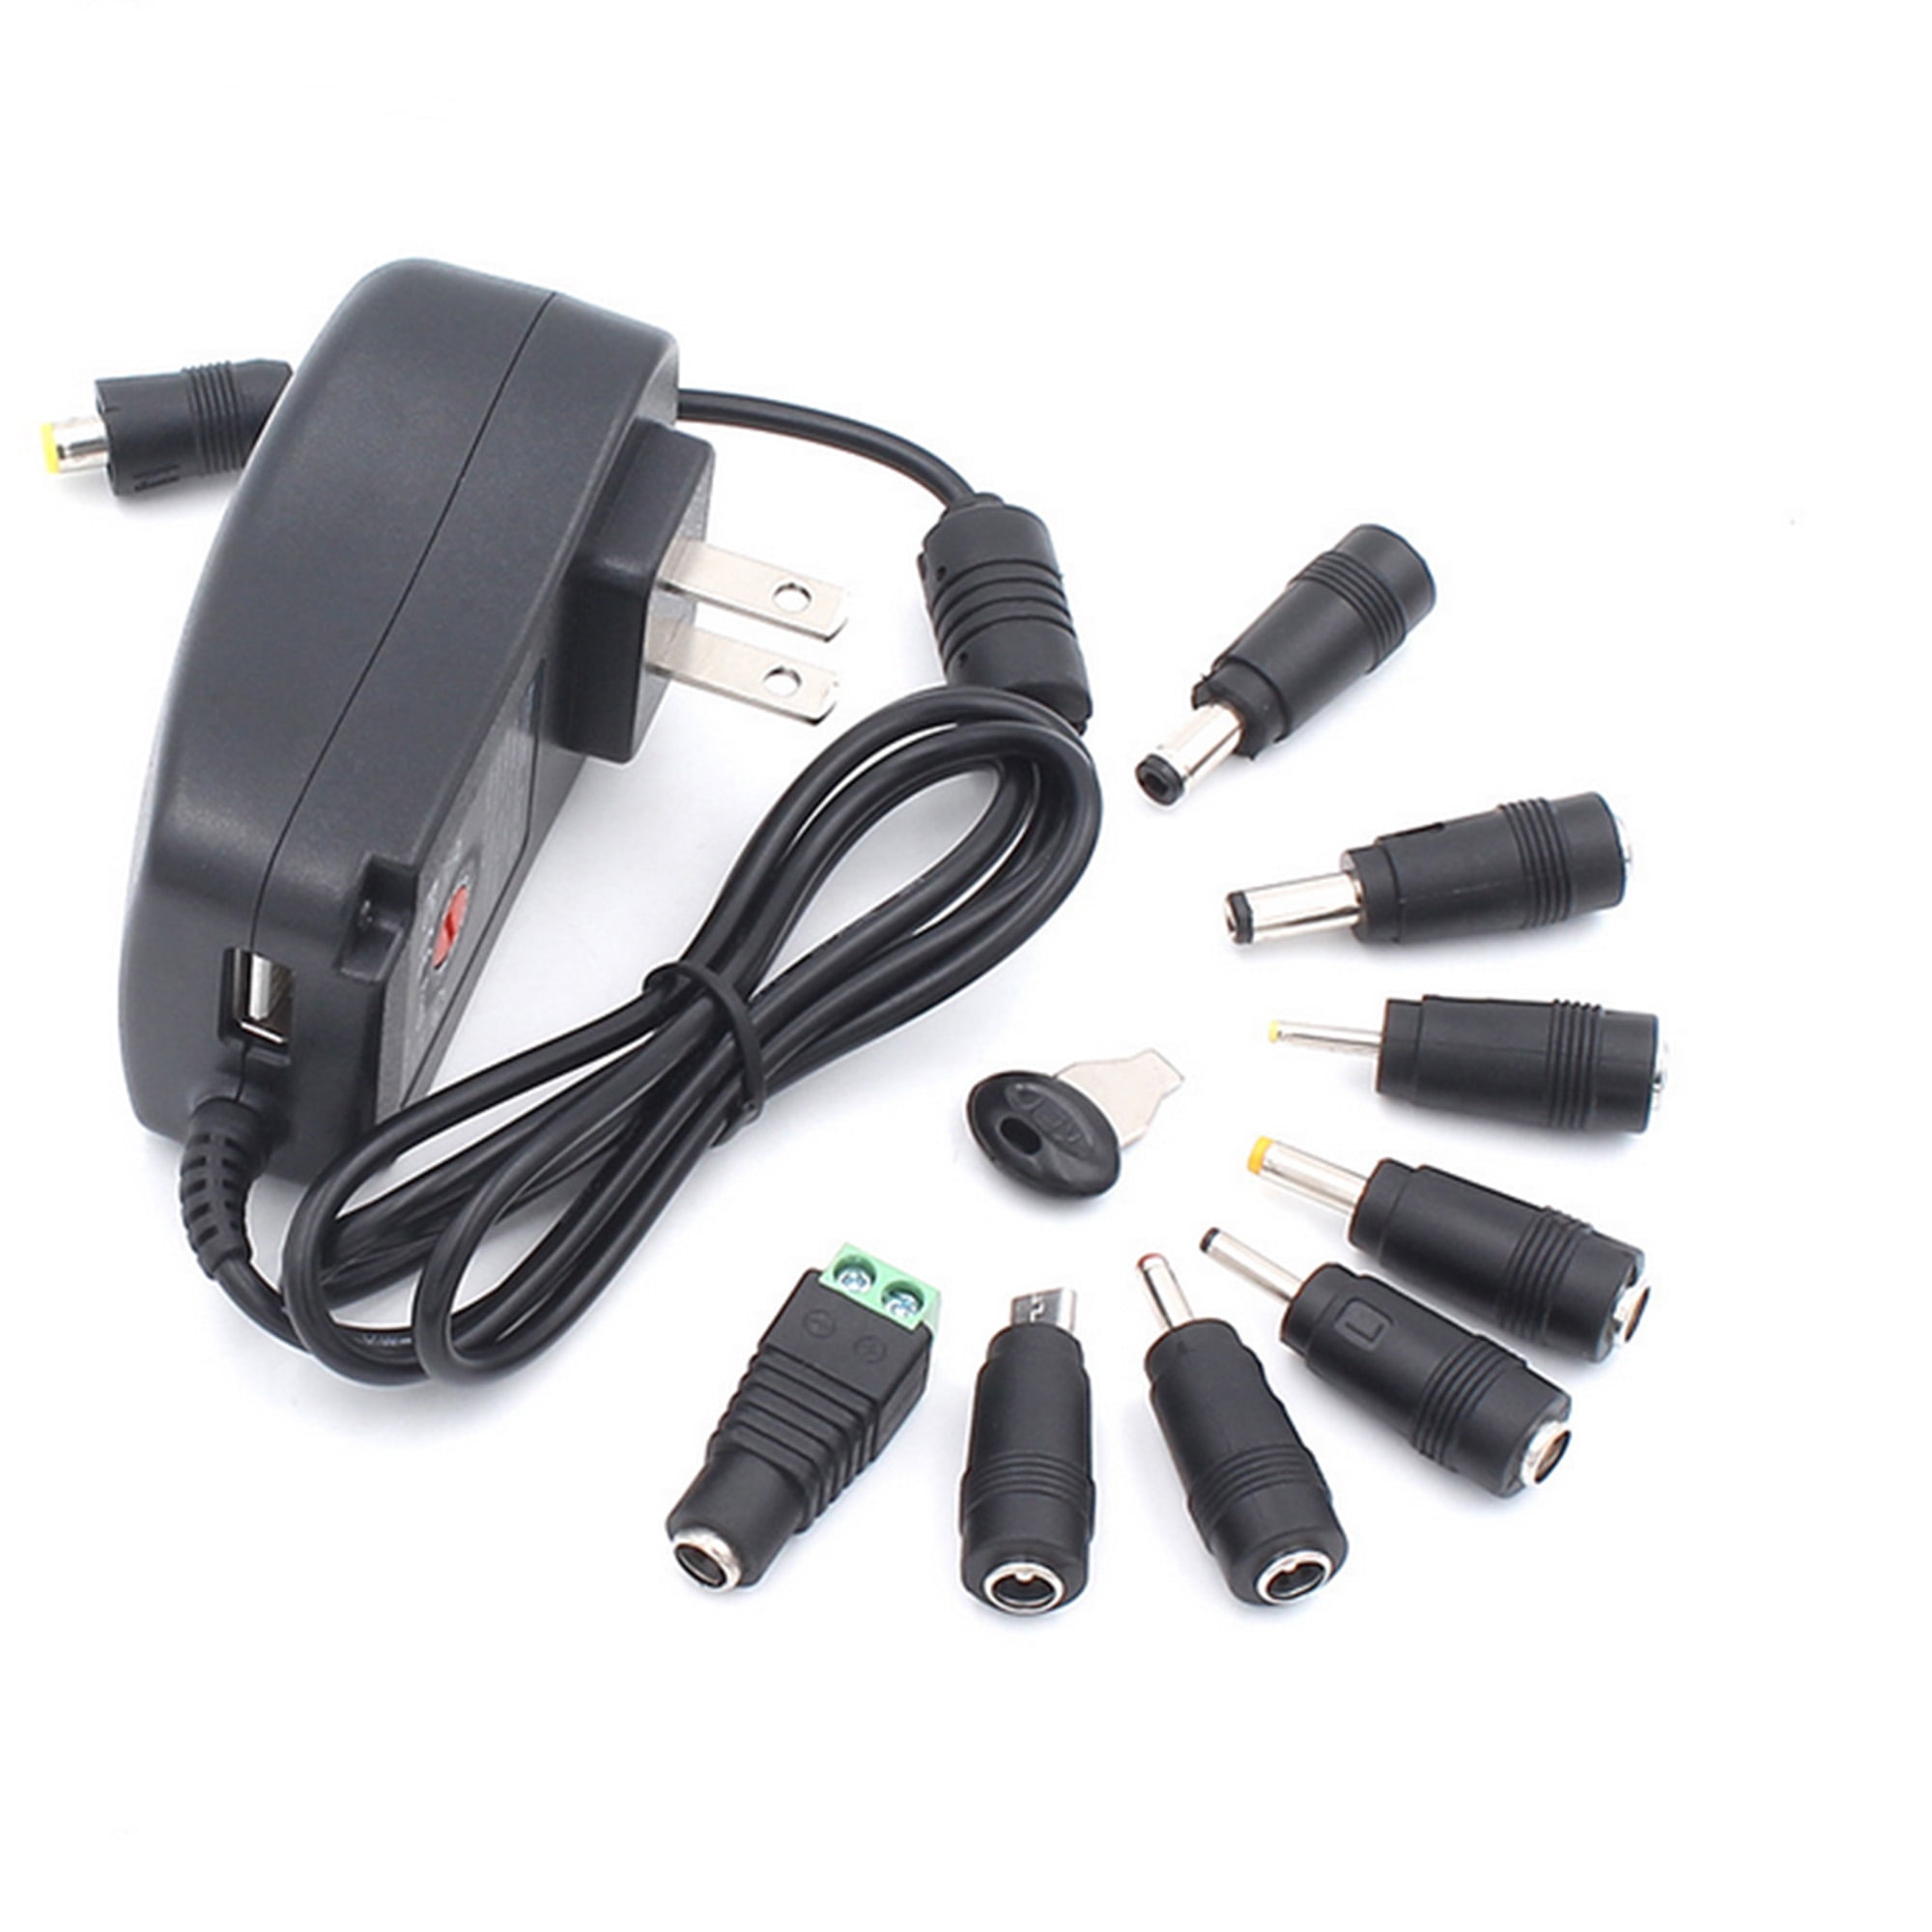 Details about   Adjustable 3-12V 3A Control Voltage Regulated Power Supply Adapter Home 